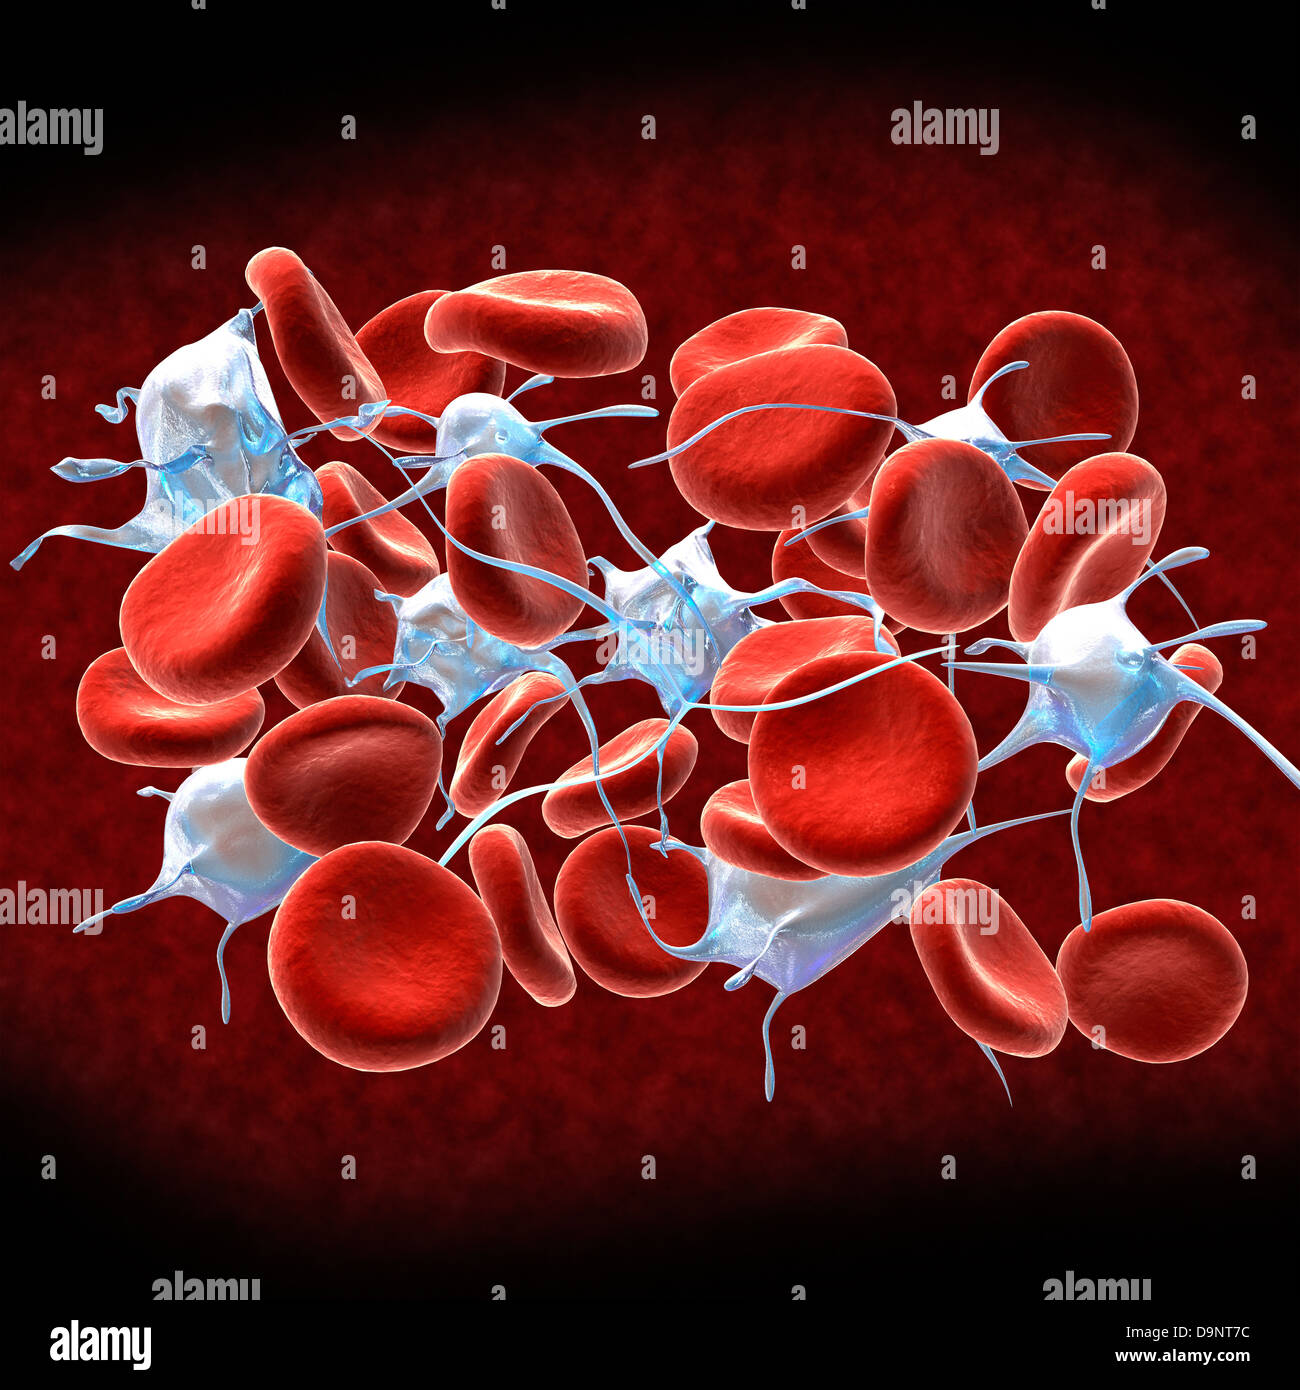 Red blood cells with leukocytes.. Stock Photo